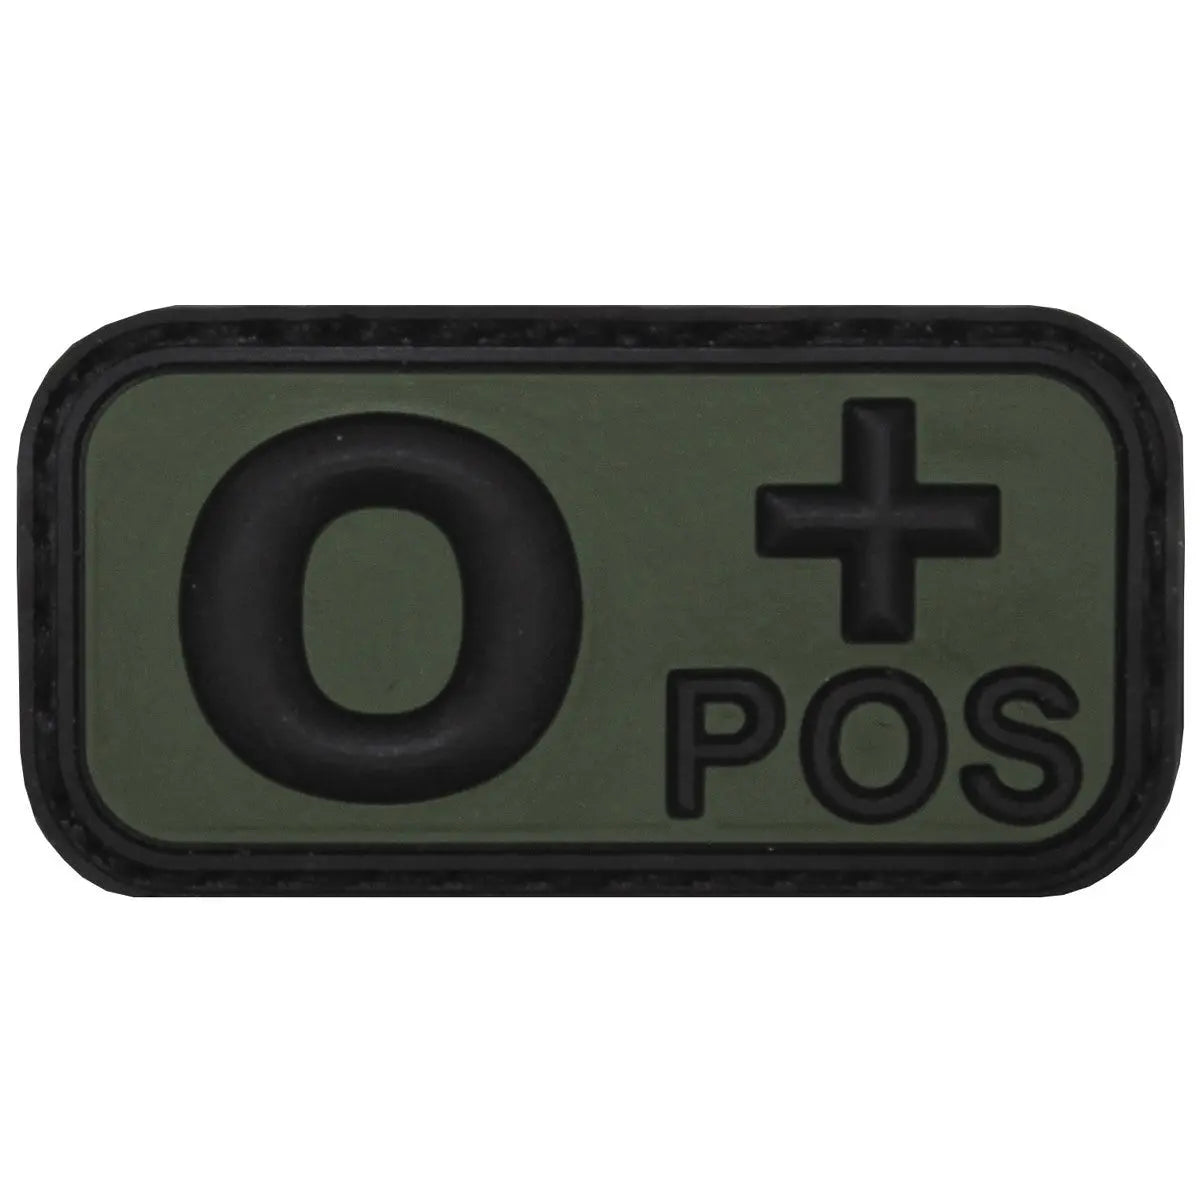 Velcro Patch, black-OD green, blood group "O POS", 3D NSO Gear